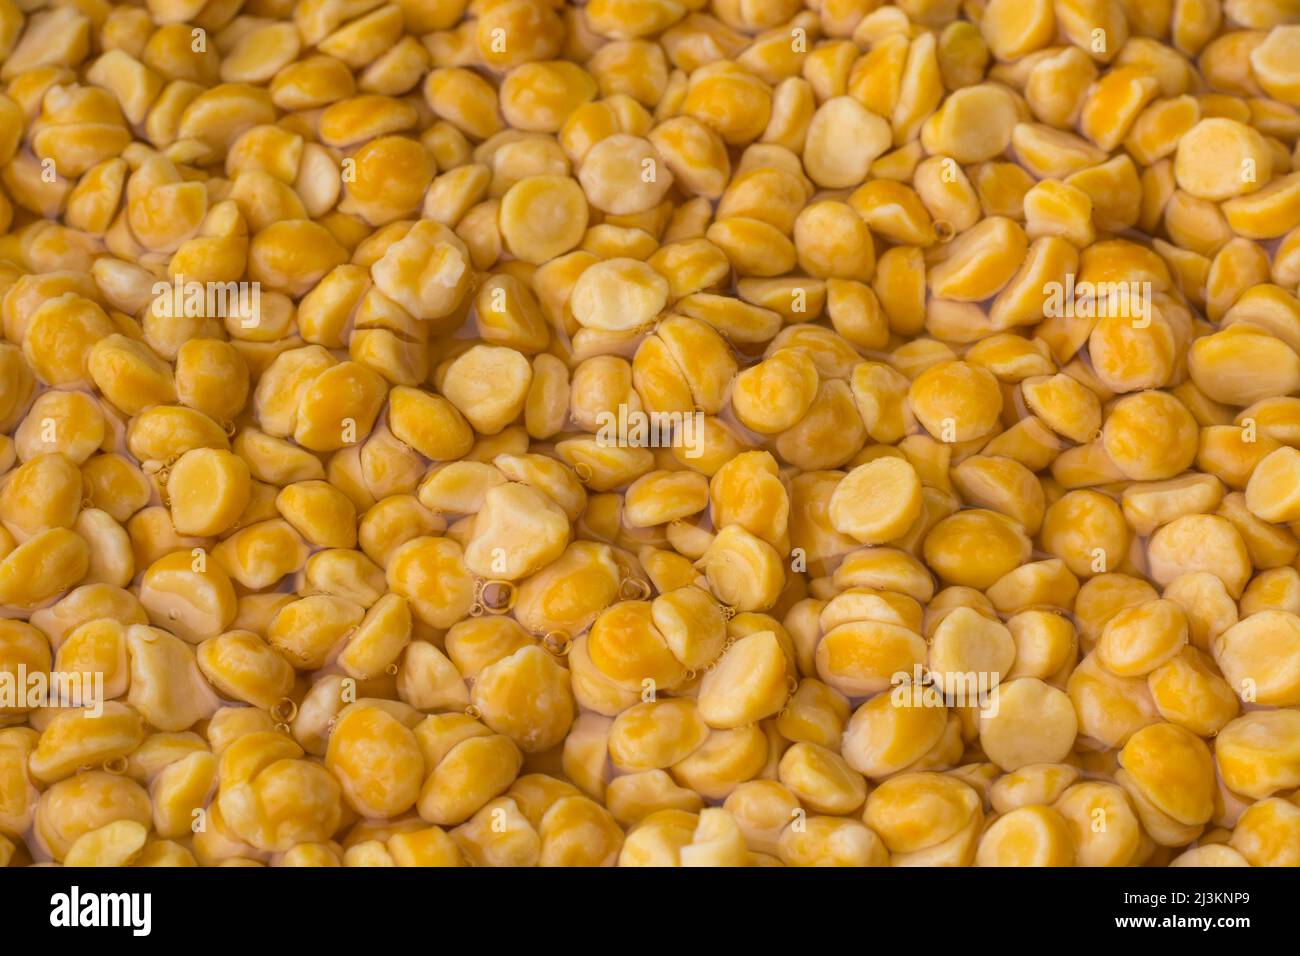 split bengal gram soaked in water overnight to cook faster, to make dhal healthy, save time and energy, closeup view taken in shallow depth of field, Stock Photo